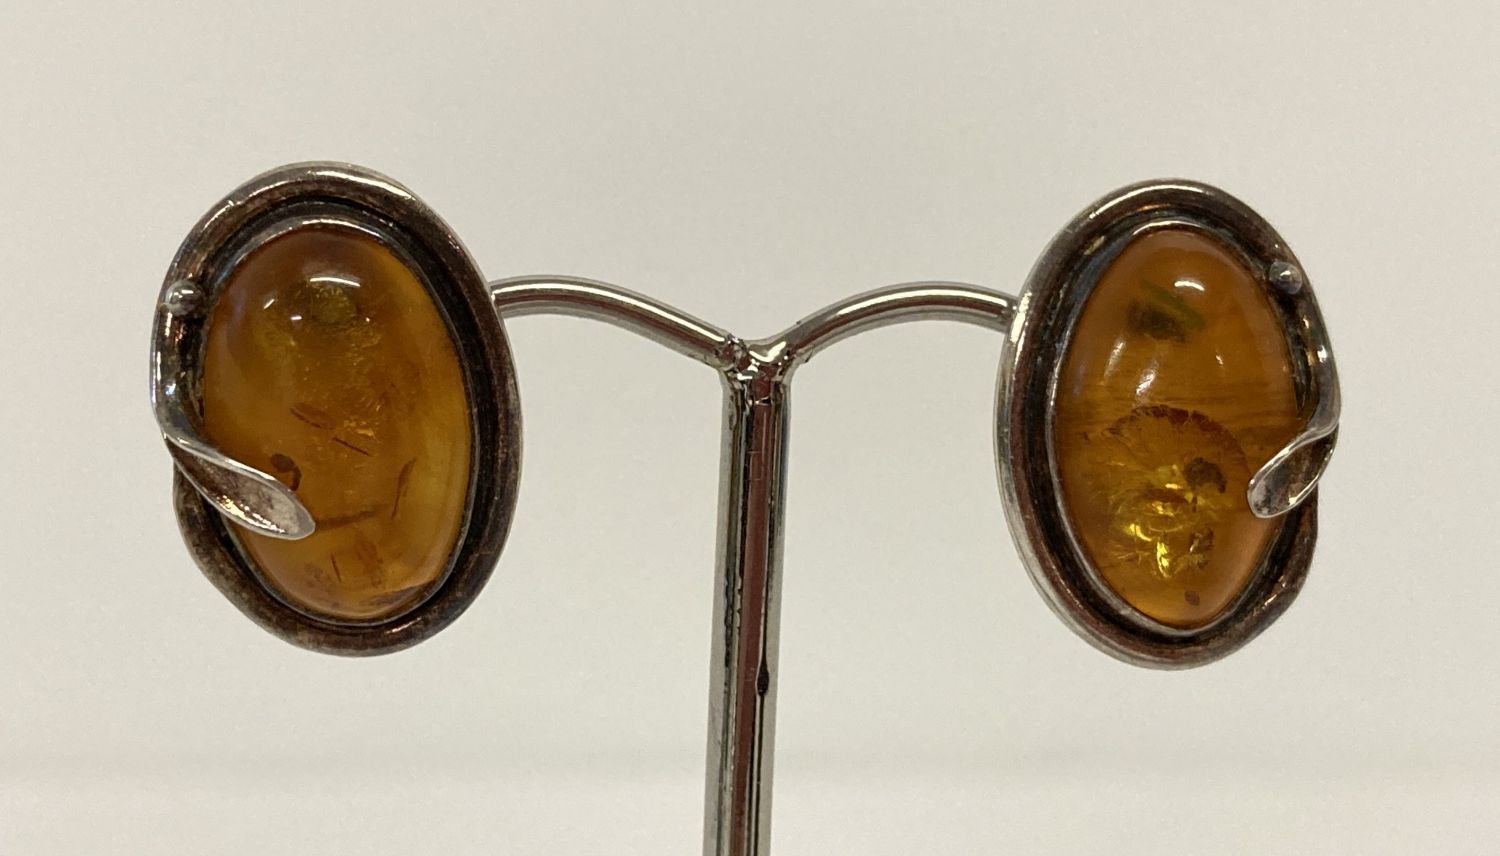 A pair of silver and amber stud style earrings with Art Nouveau style decoration.